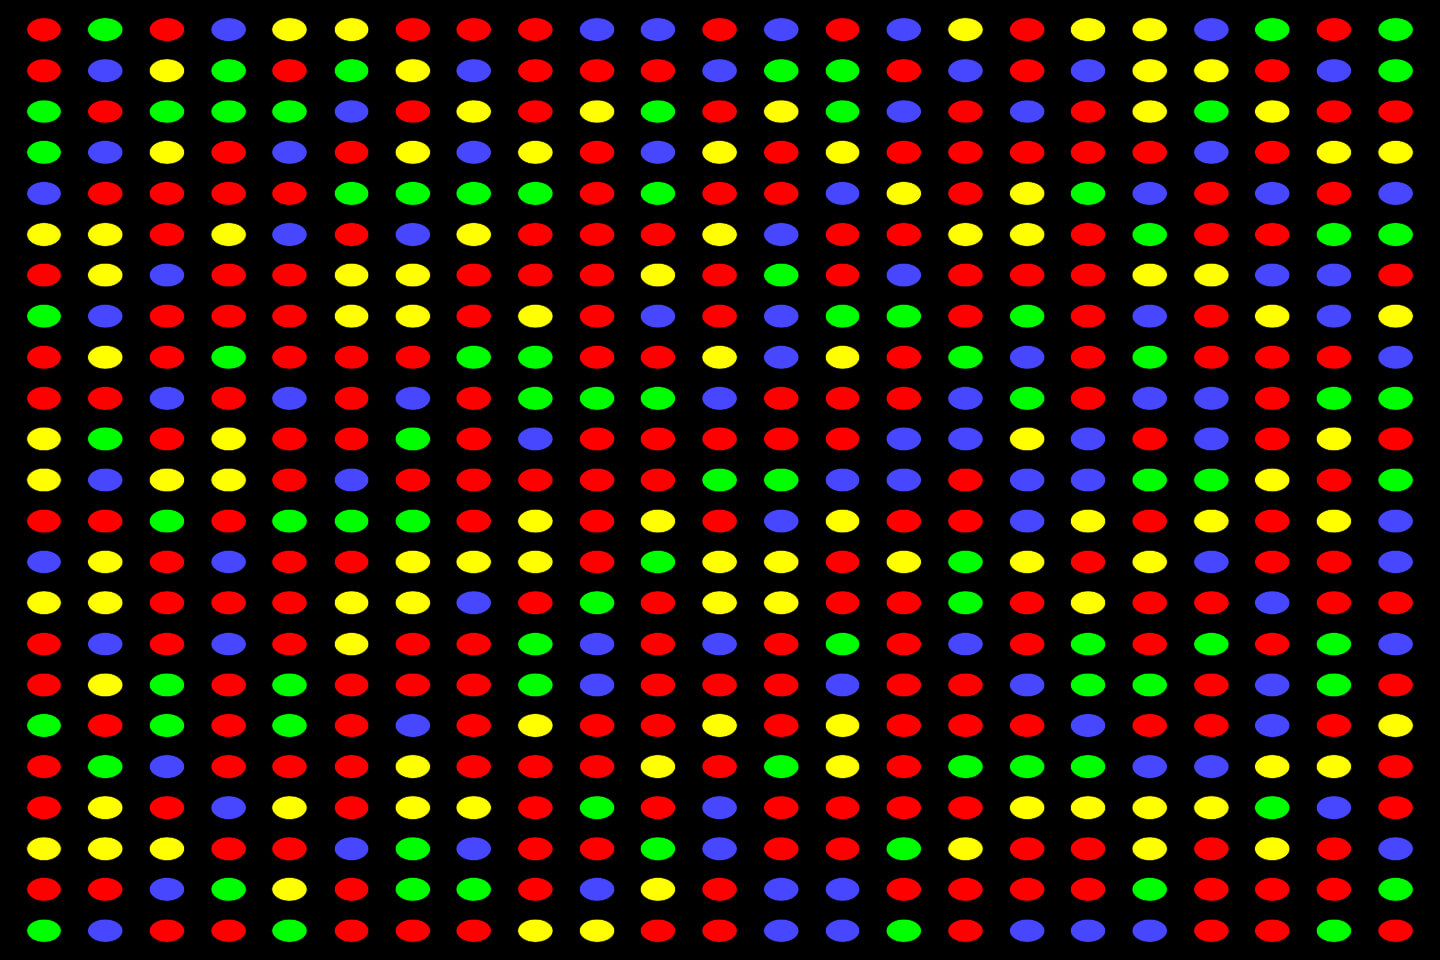 An image representing a small section of an Illumina flow cell during the synthesis run.